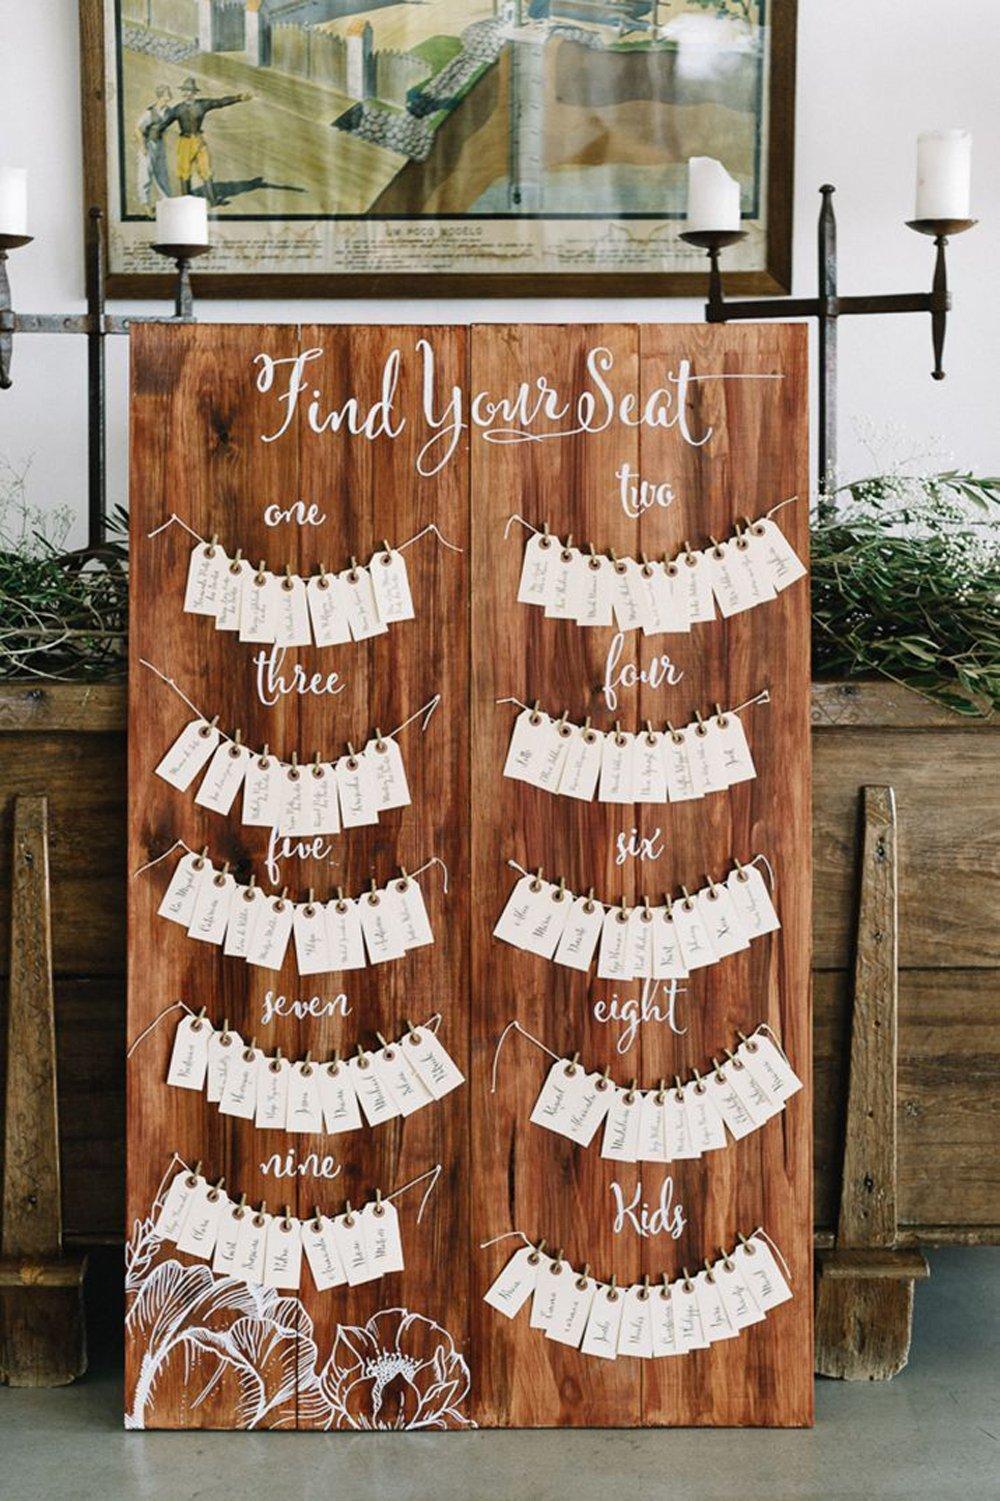 Rustic Wood Effect Sit Anywhere No Seating Plan Personalised Wedding Sign 